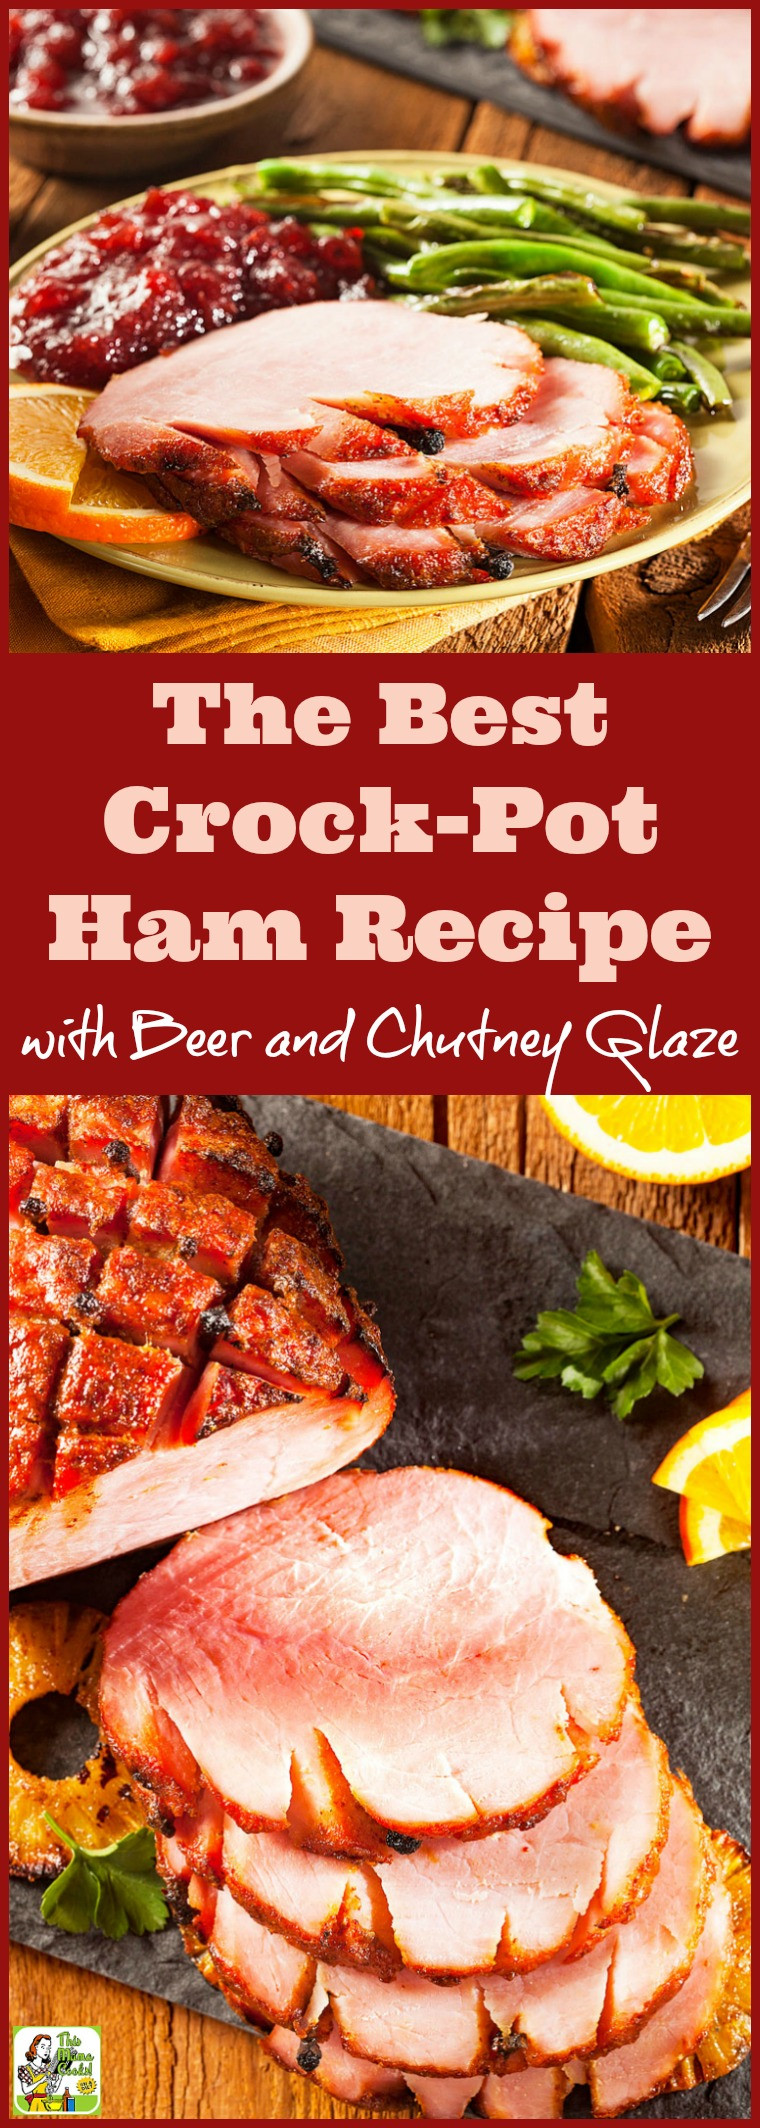 Easter Ham In A Crockpot
 The Best Crock Pot Ham Recipe with Beer and Chutney Glaze